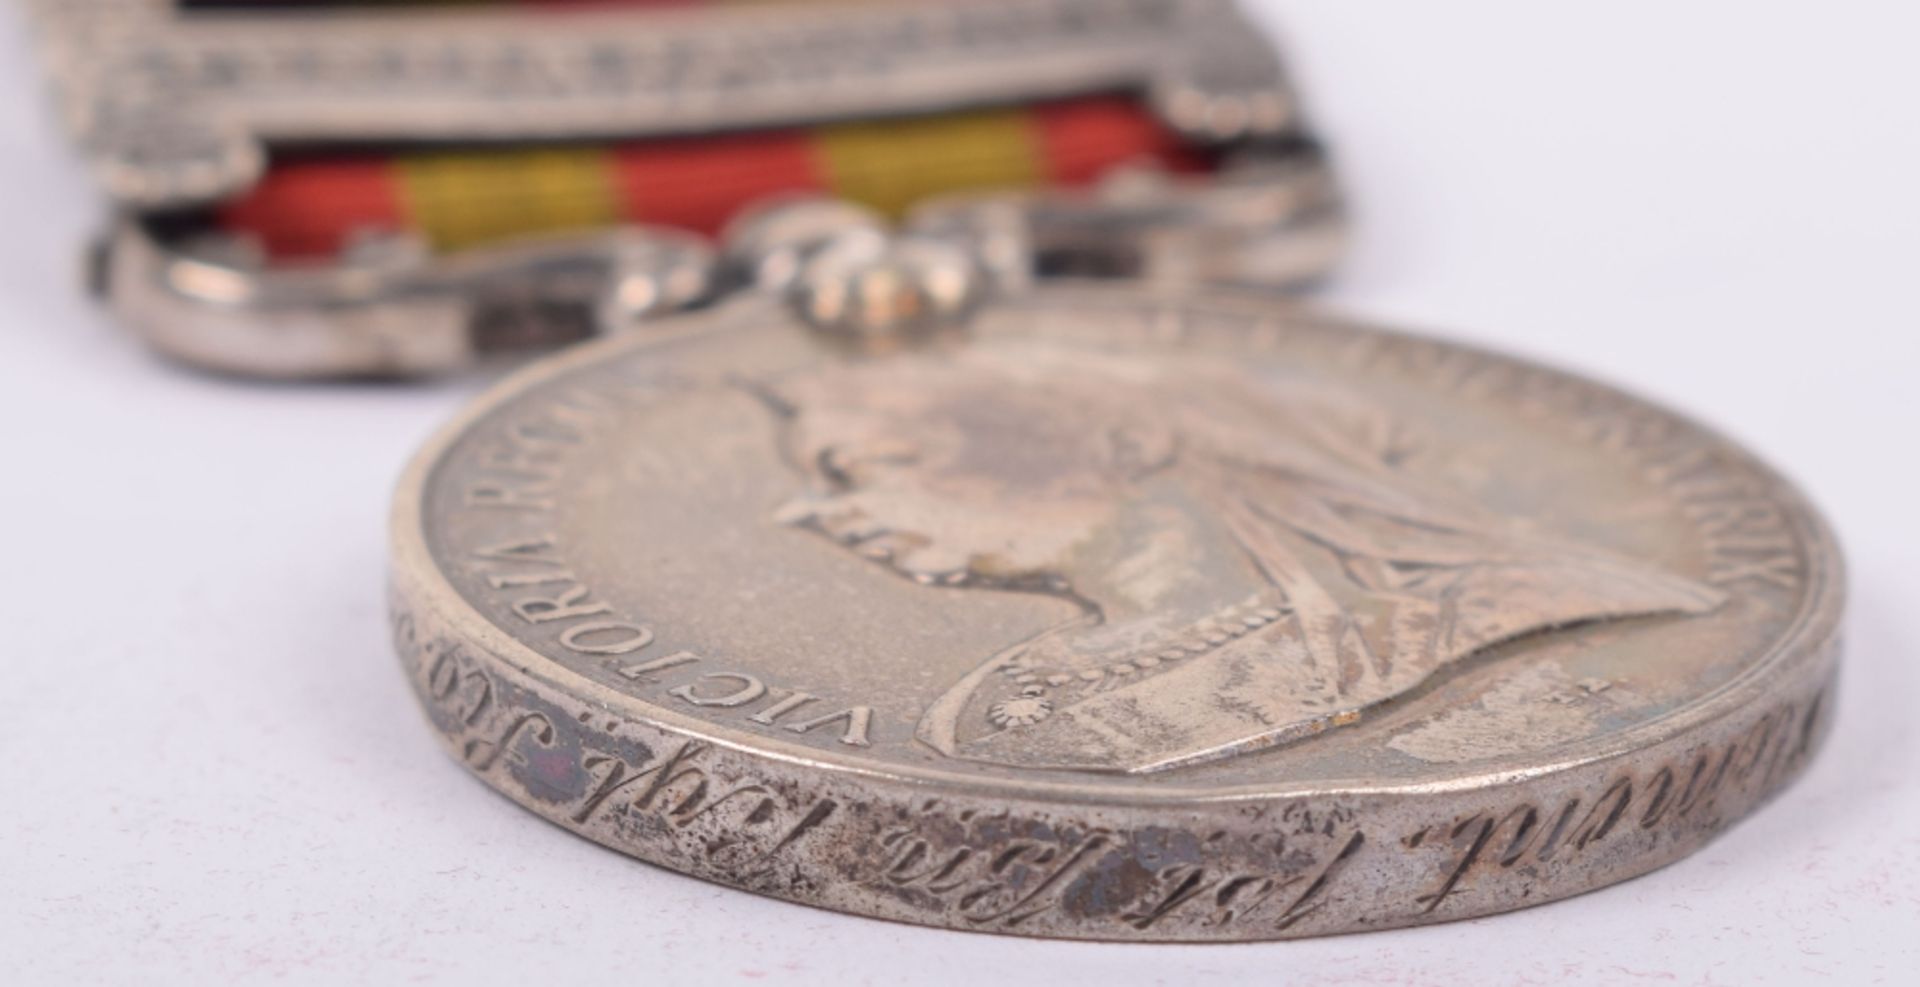 Indian General Service Medal 1895-1902 Royal Scots Fusiliers - Image 4 of 6